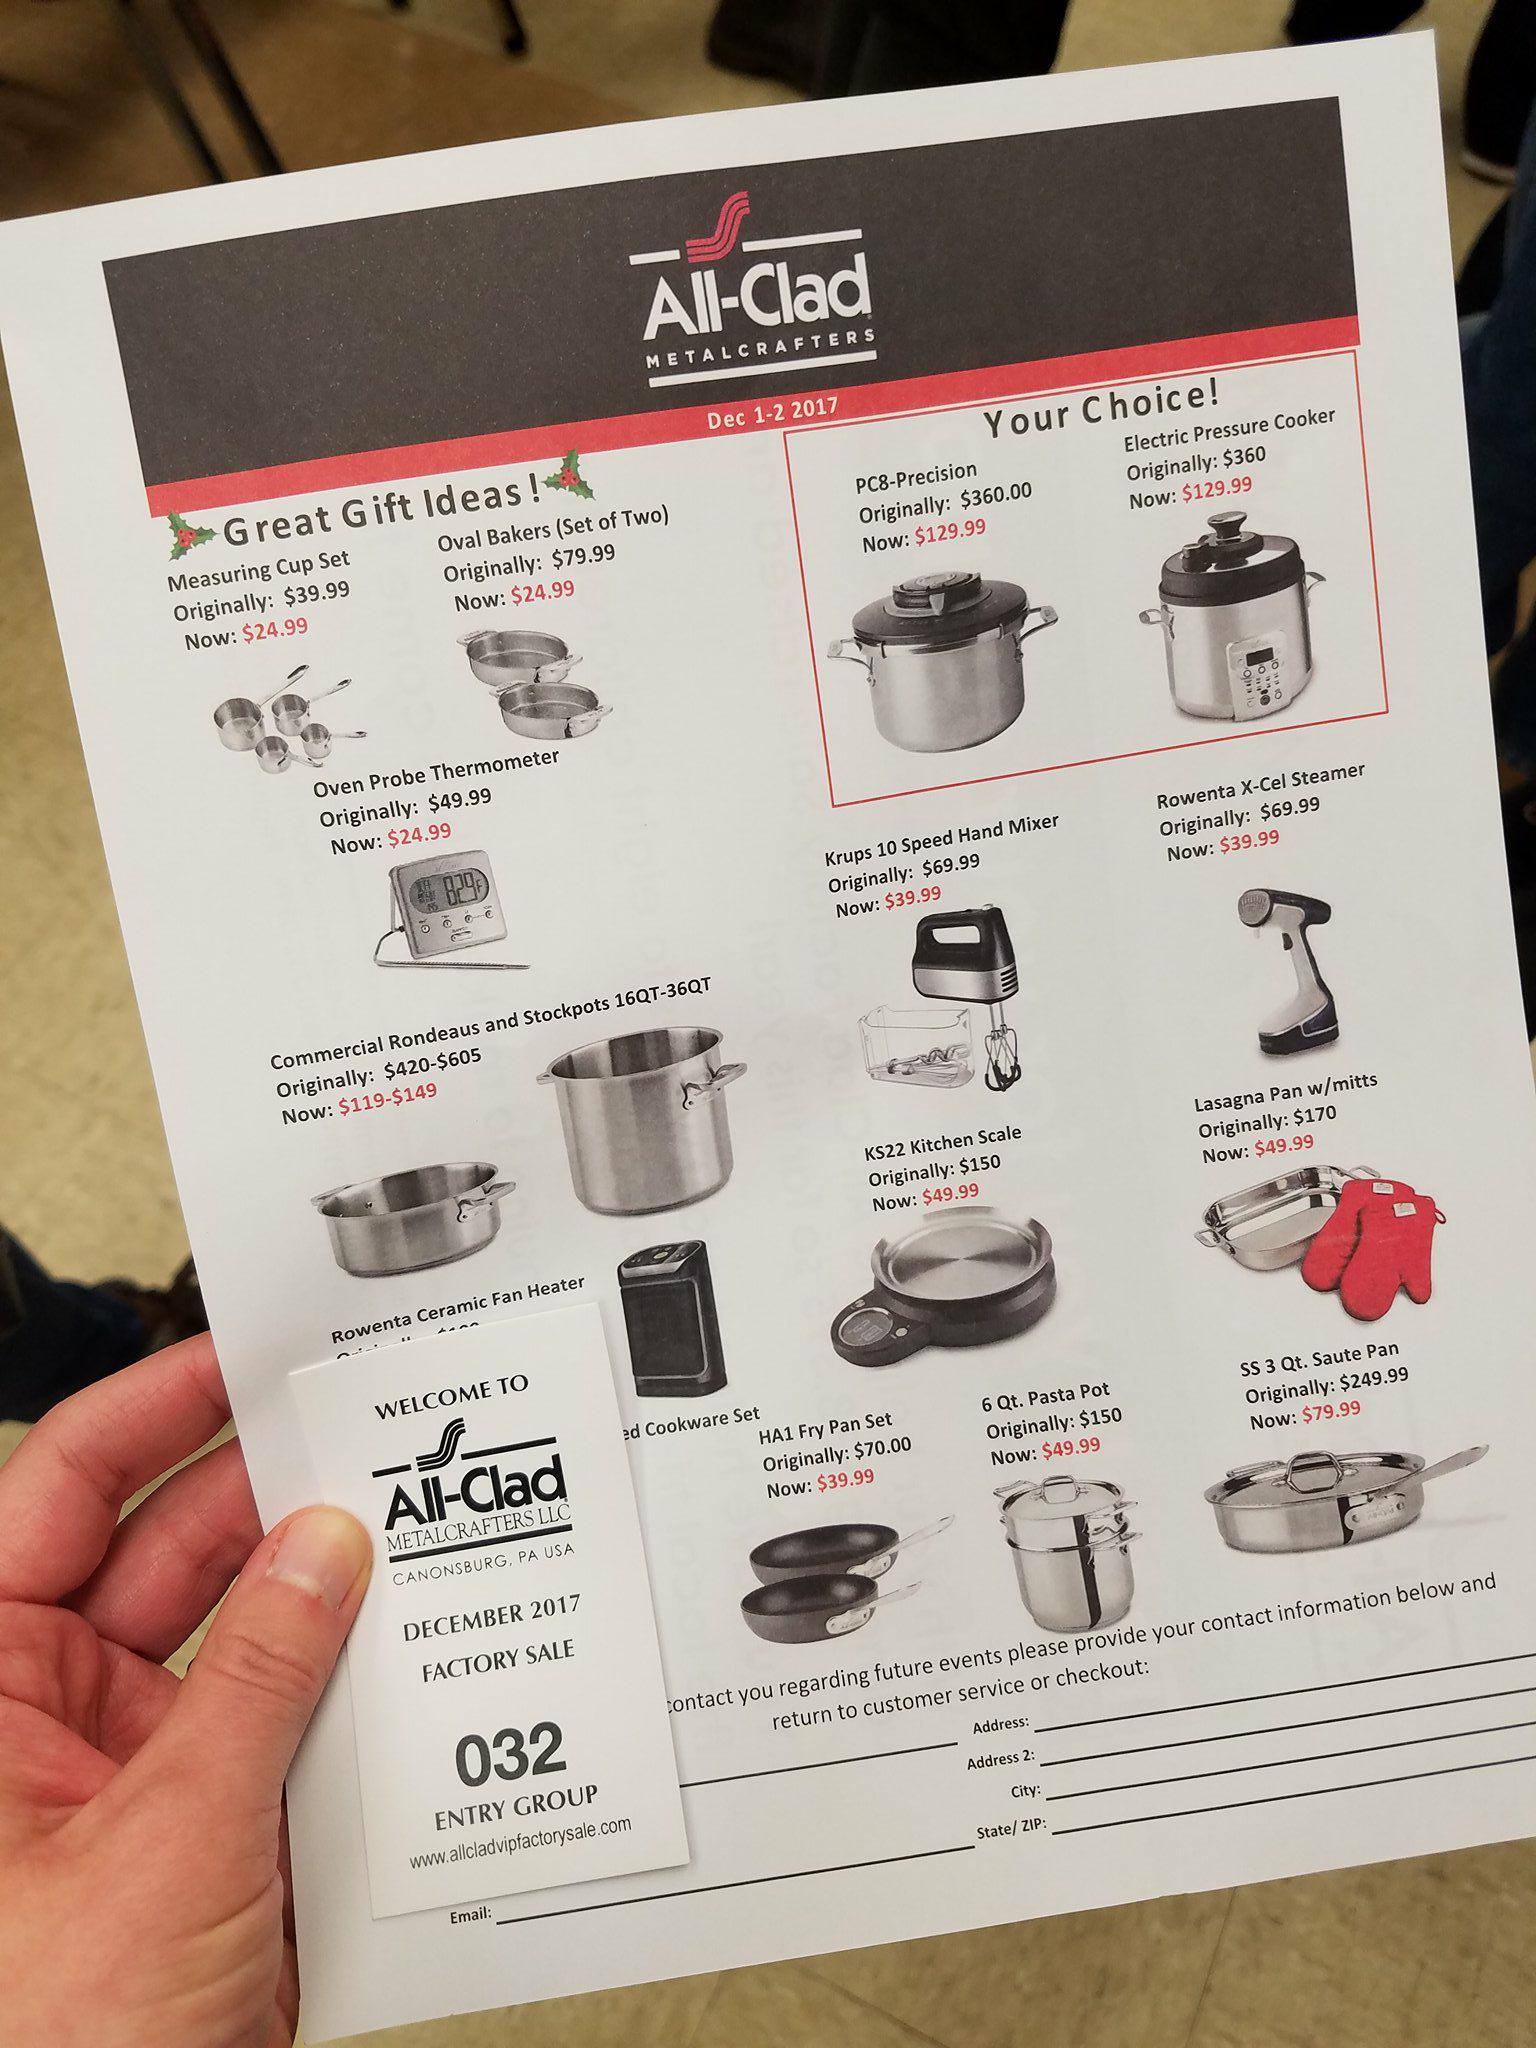 All Clad Seconds Sale in Washington, PA A Must for Cooks